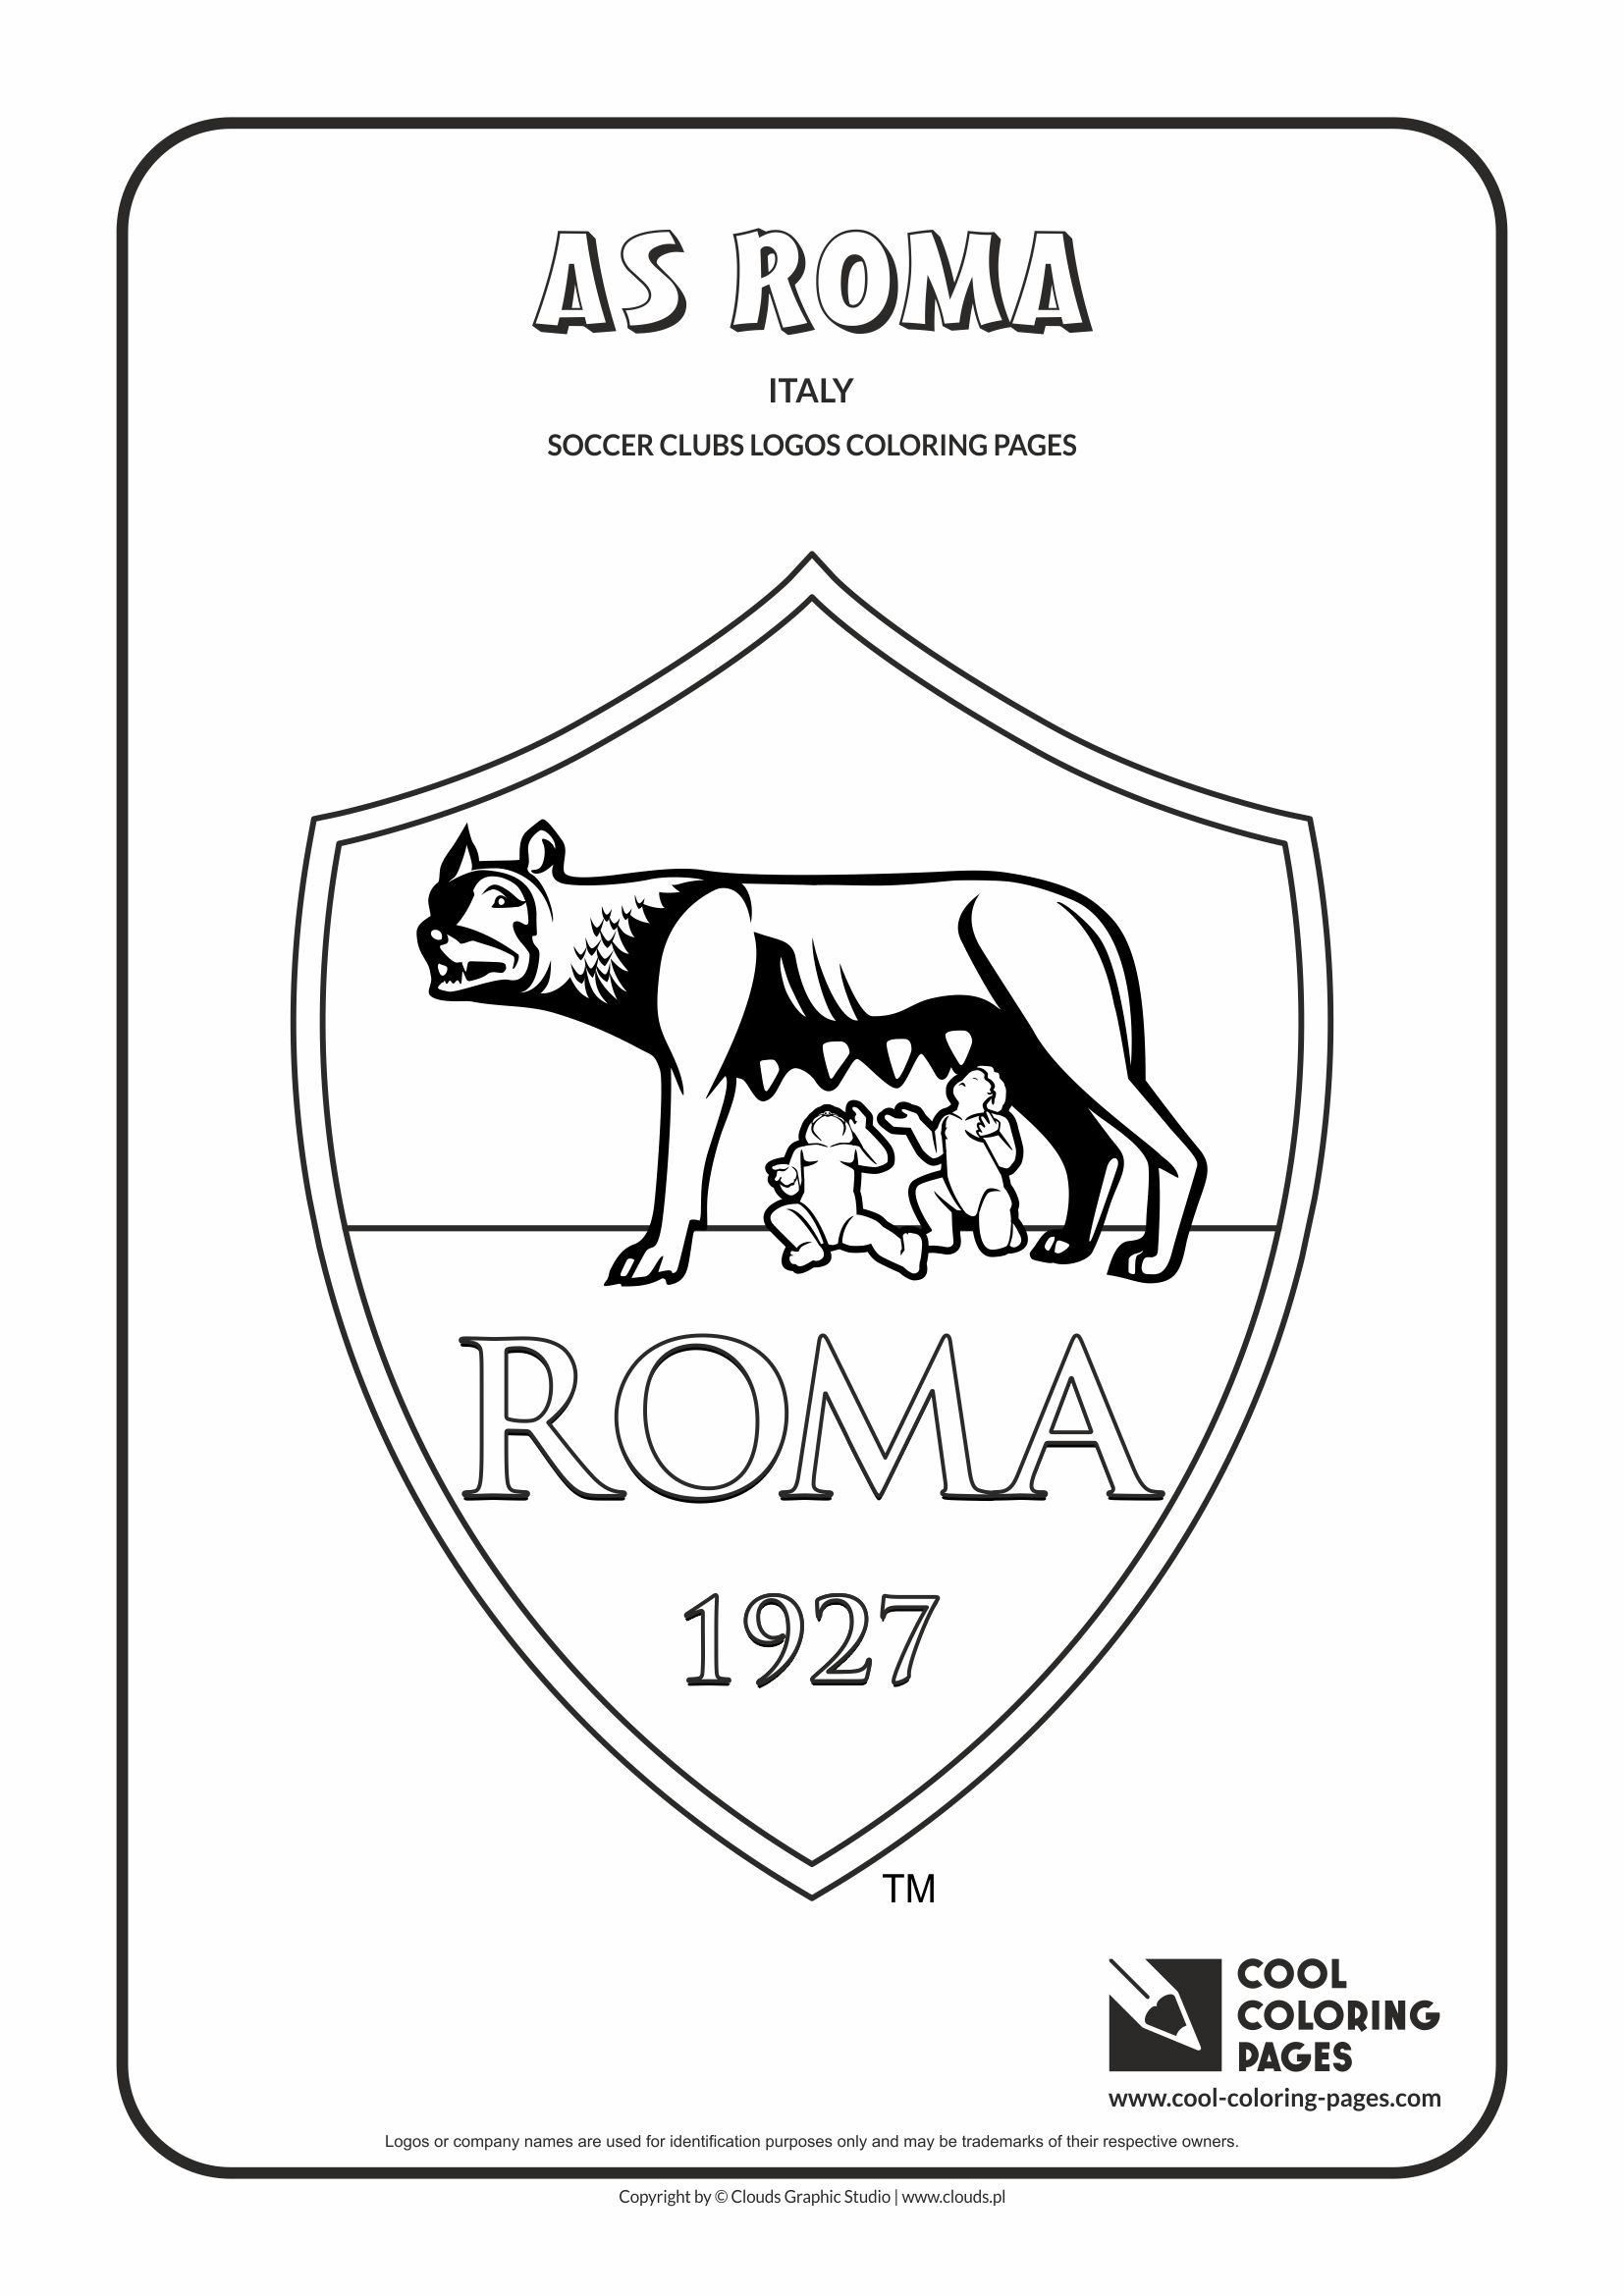 Cool Coloring Pages Soccer clubs logos ...